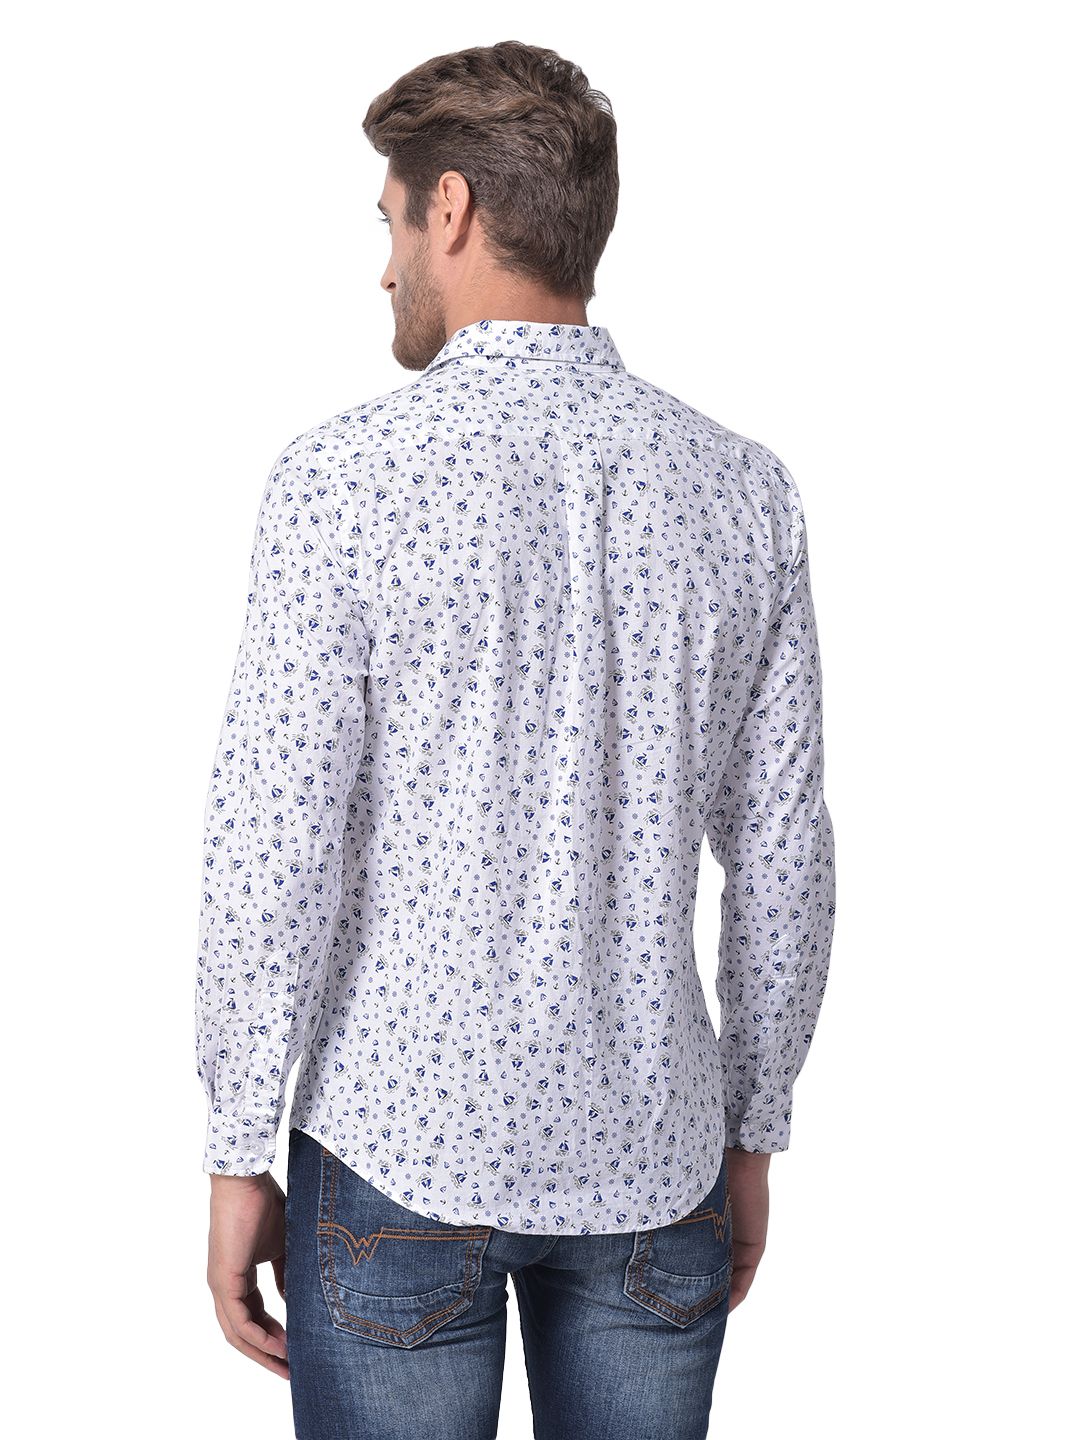 White and blue printed cotton shirt